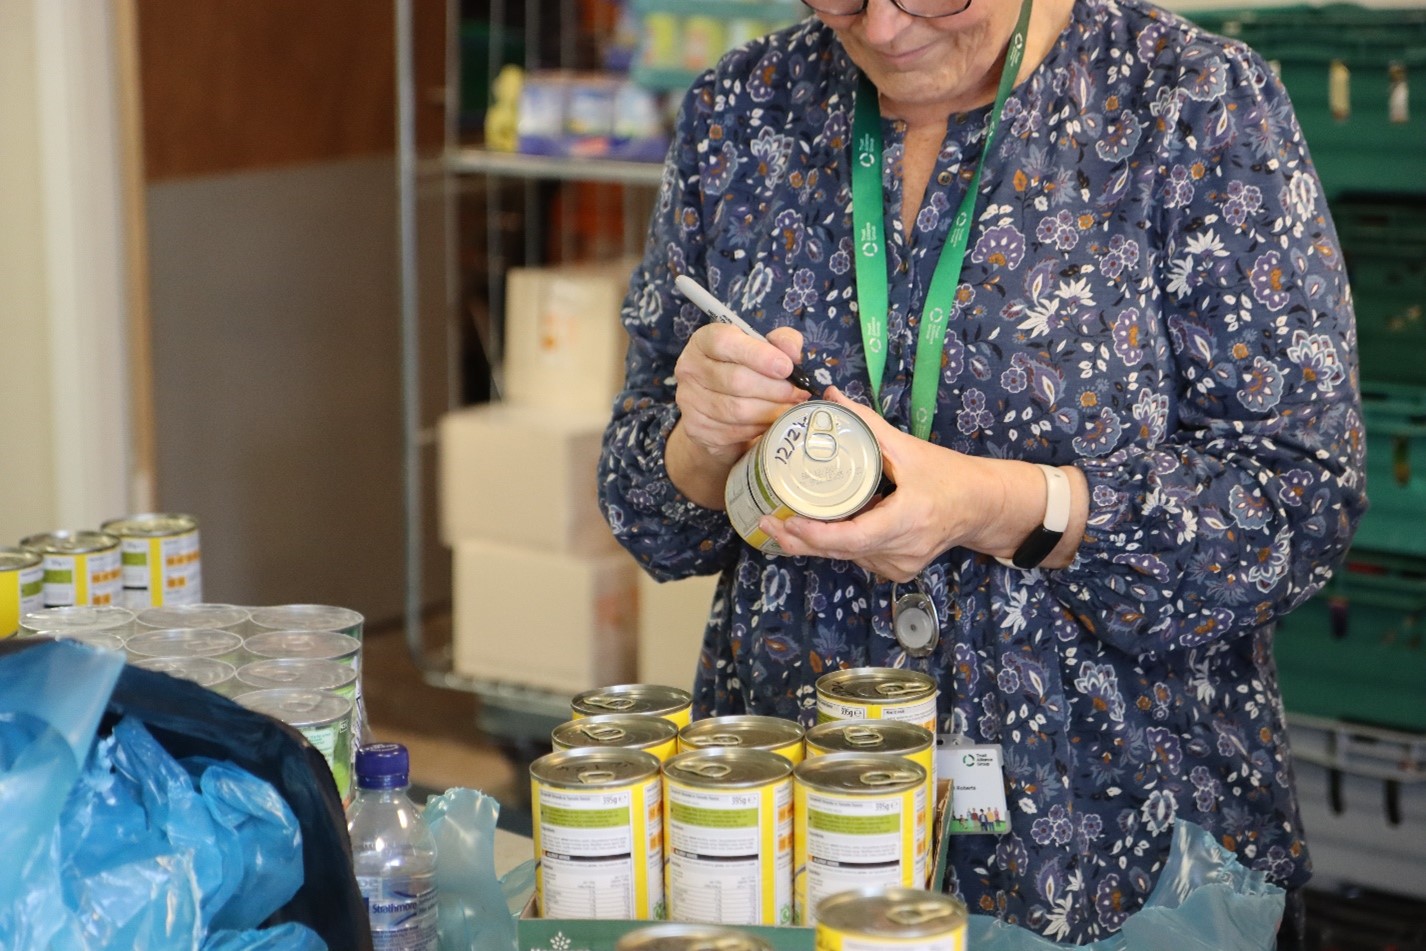 Warrington Foodbank welcomes donations and volunteers from Ombudsman Services over Easter